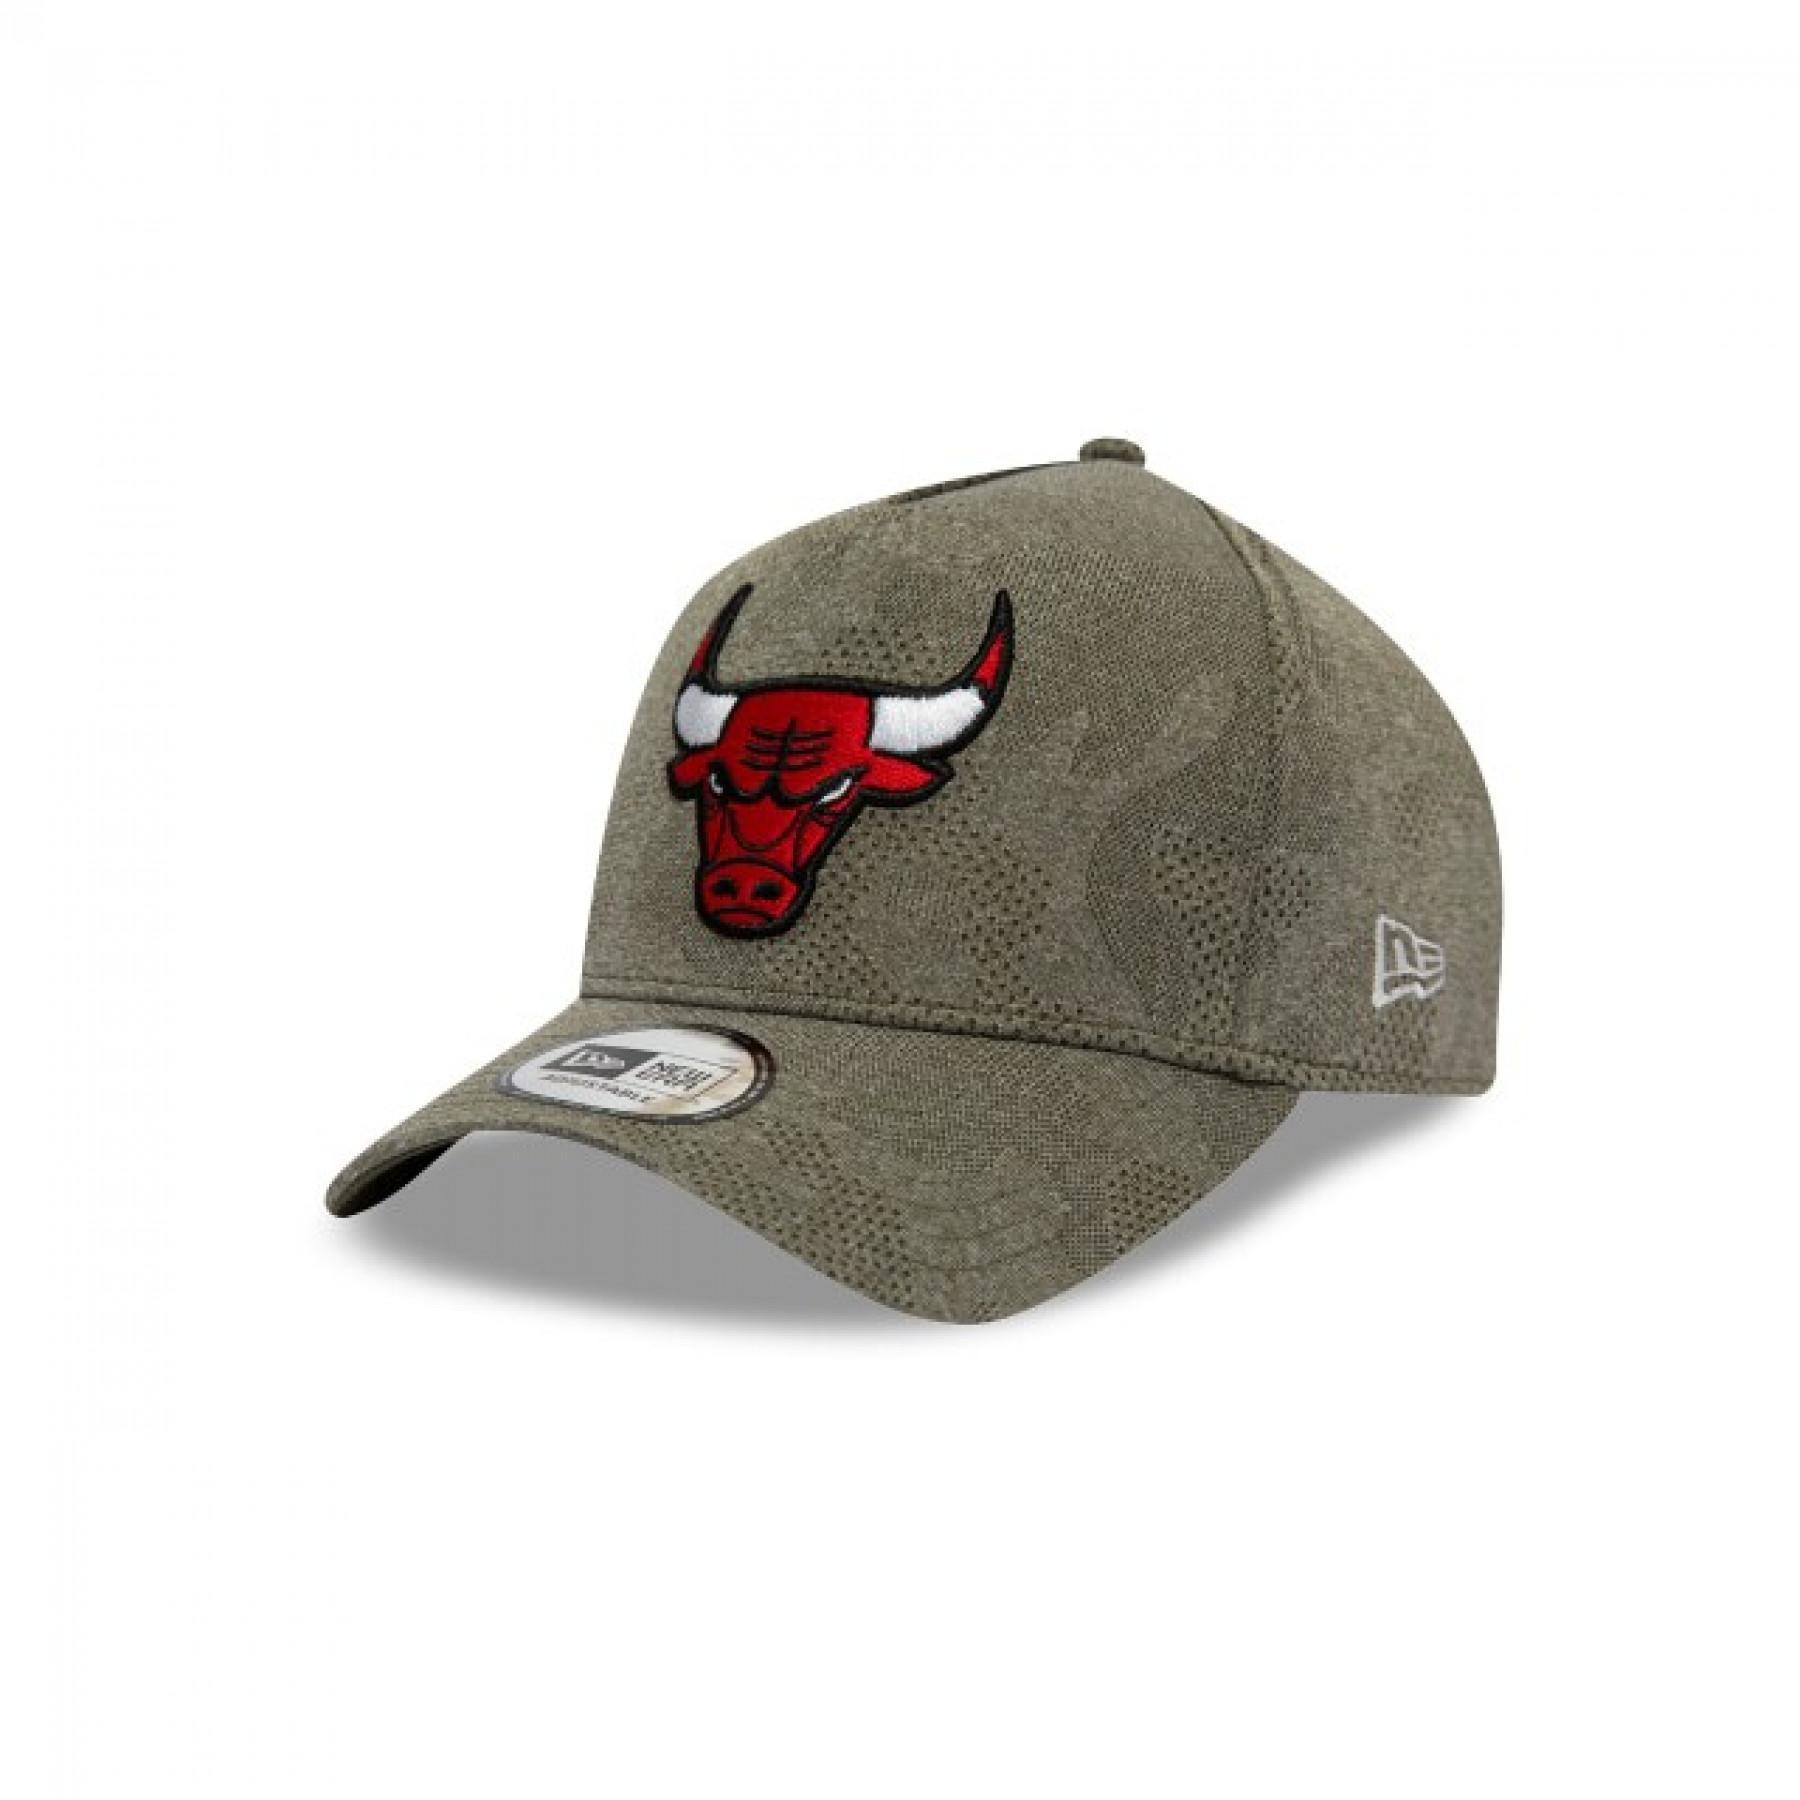 Casquette New Era Chicago Bulls Engineered A frame 9forty